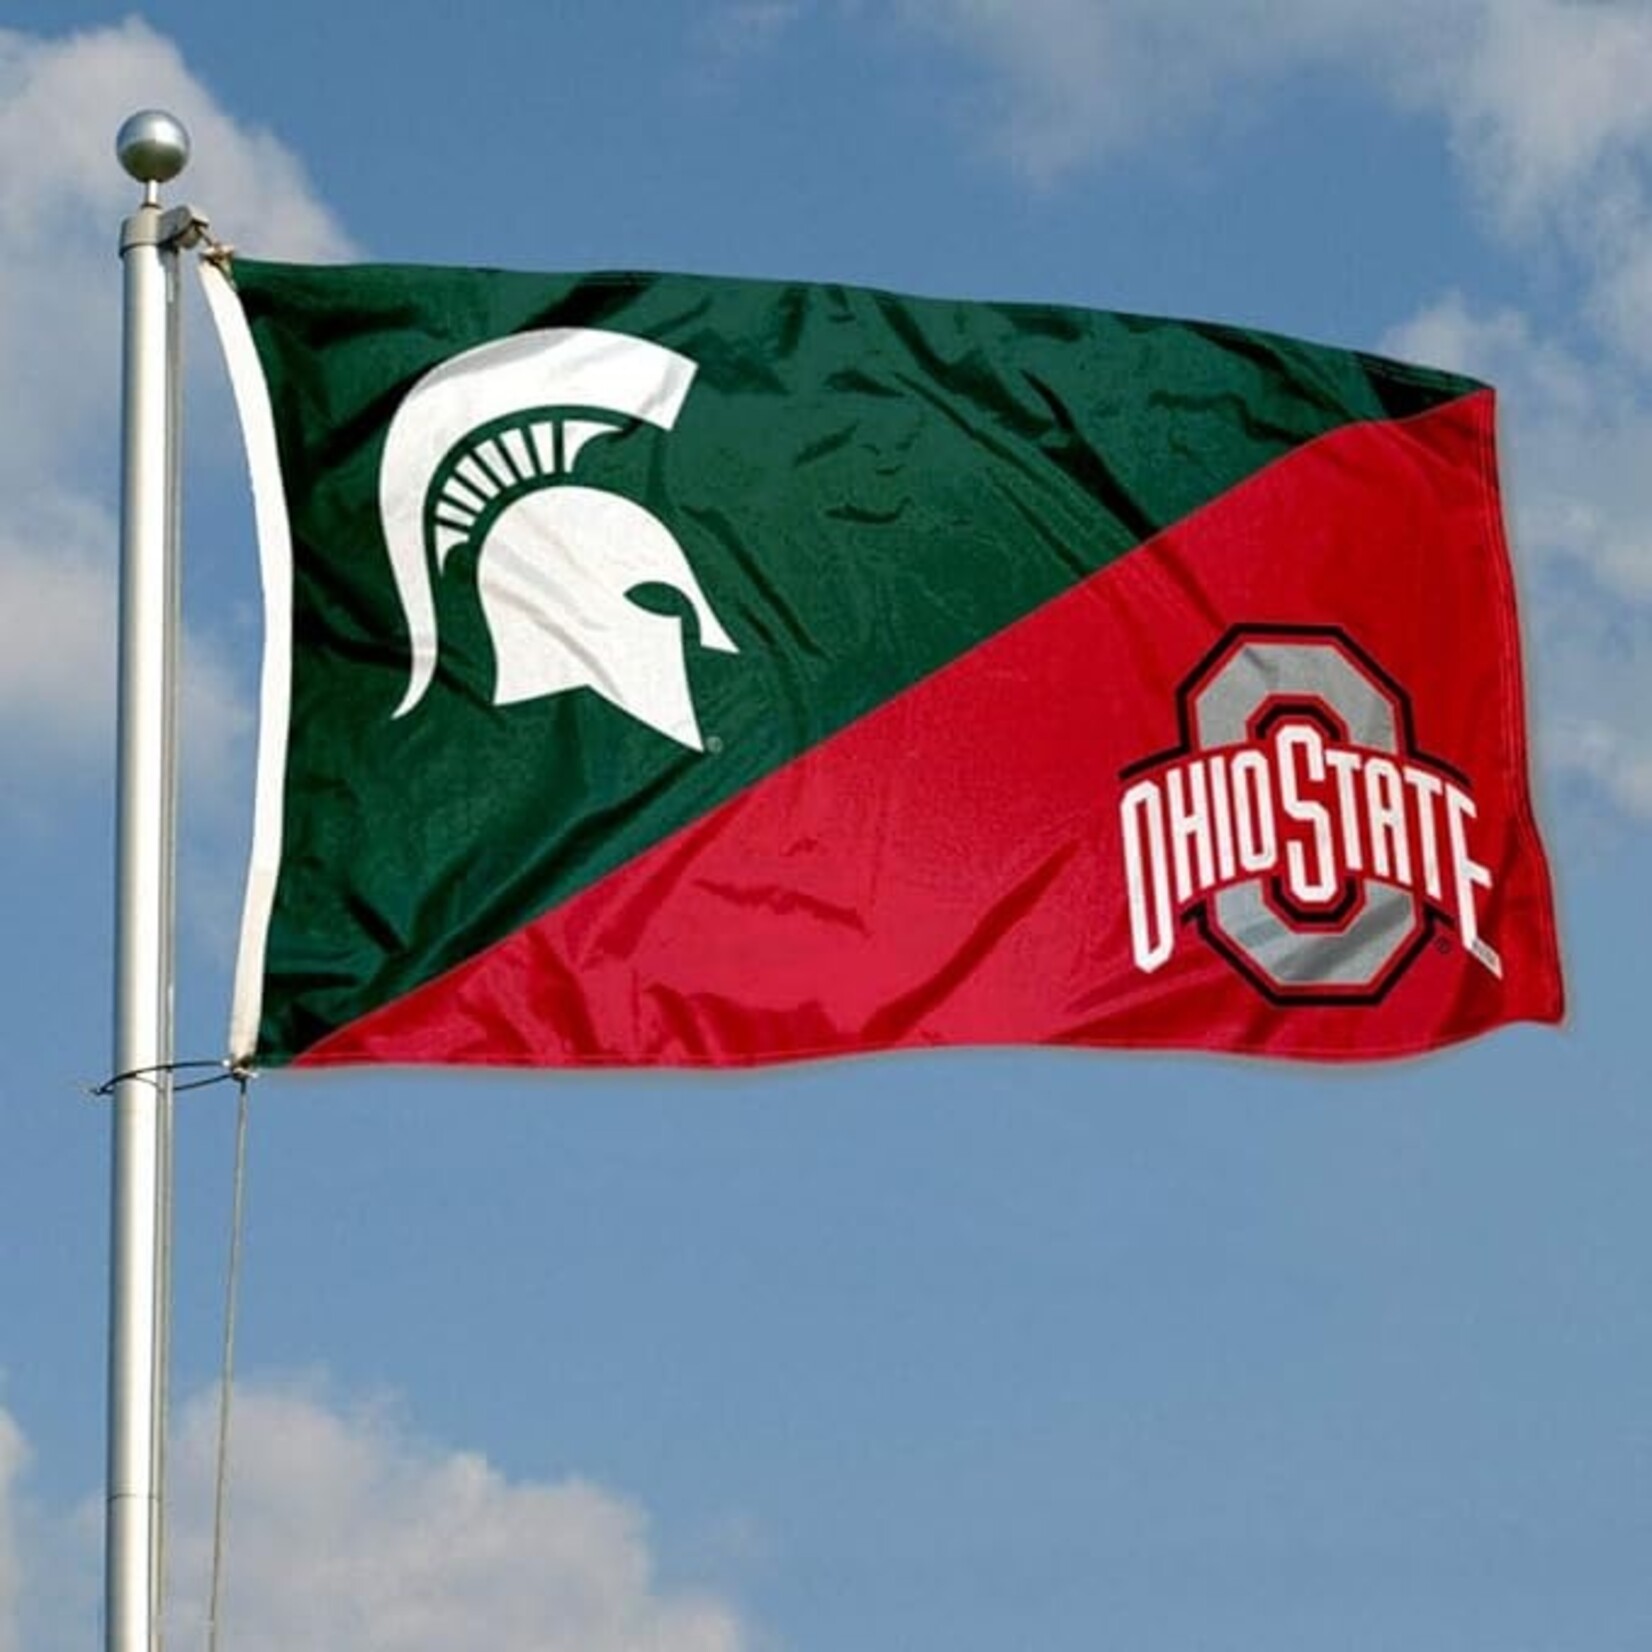 Sewing Concepts HD Flag 3x5' SS MSU Over Ohio